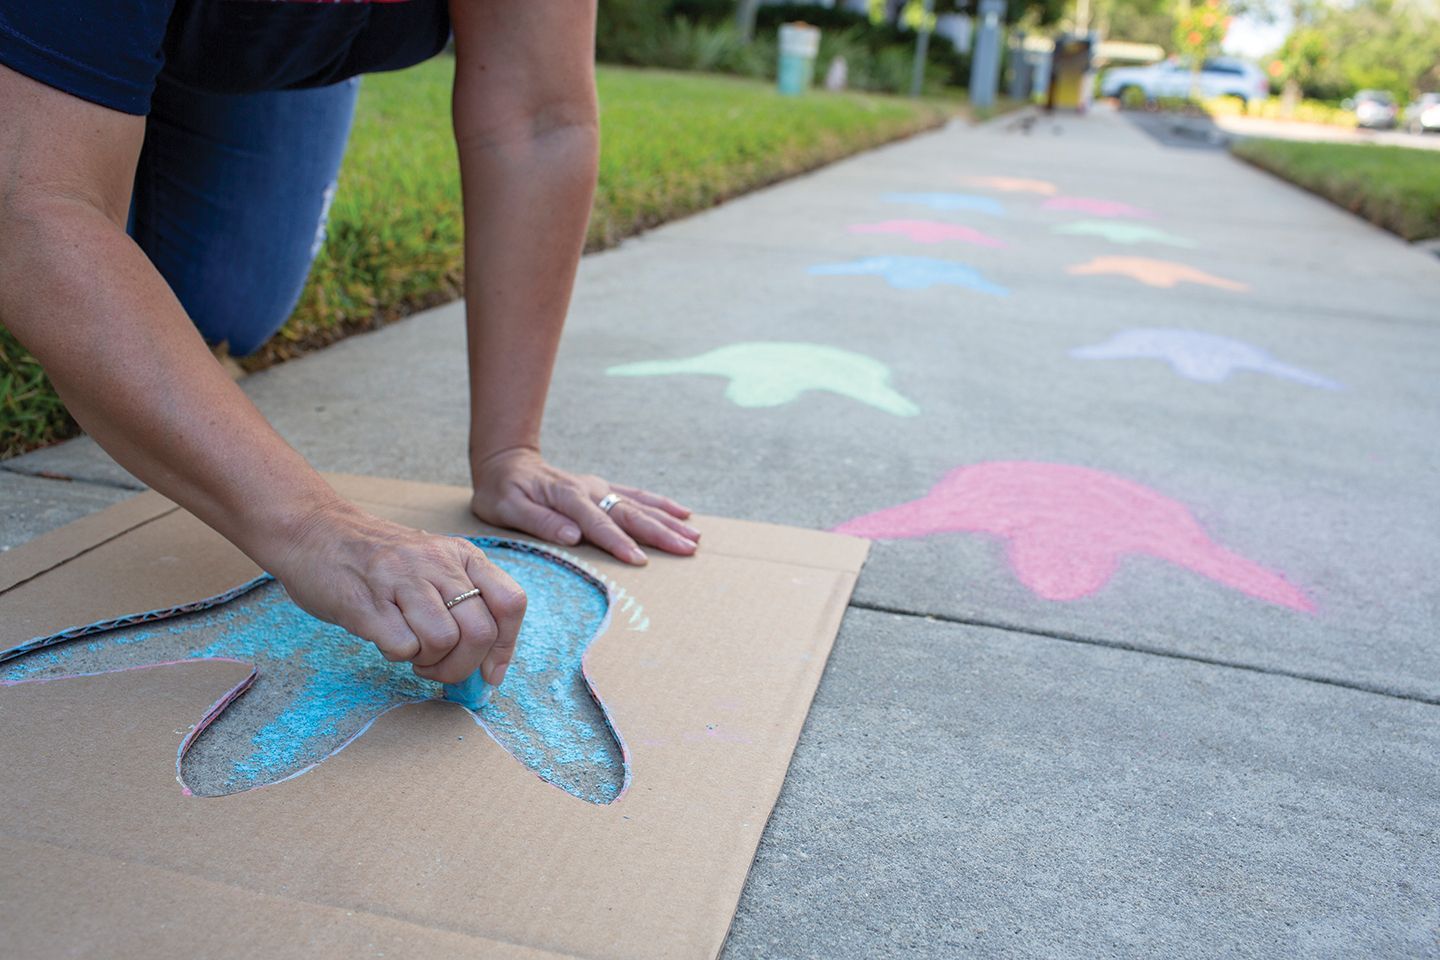 Make a sidewalk path to the Book Fair by drawing simple dinosaur footprints with colored chalk. Toolkit keyword: FOOTPRINT -   24 build a dinosaur crafts
 ideas